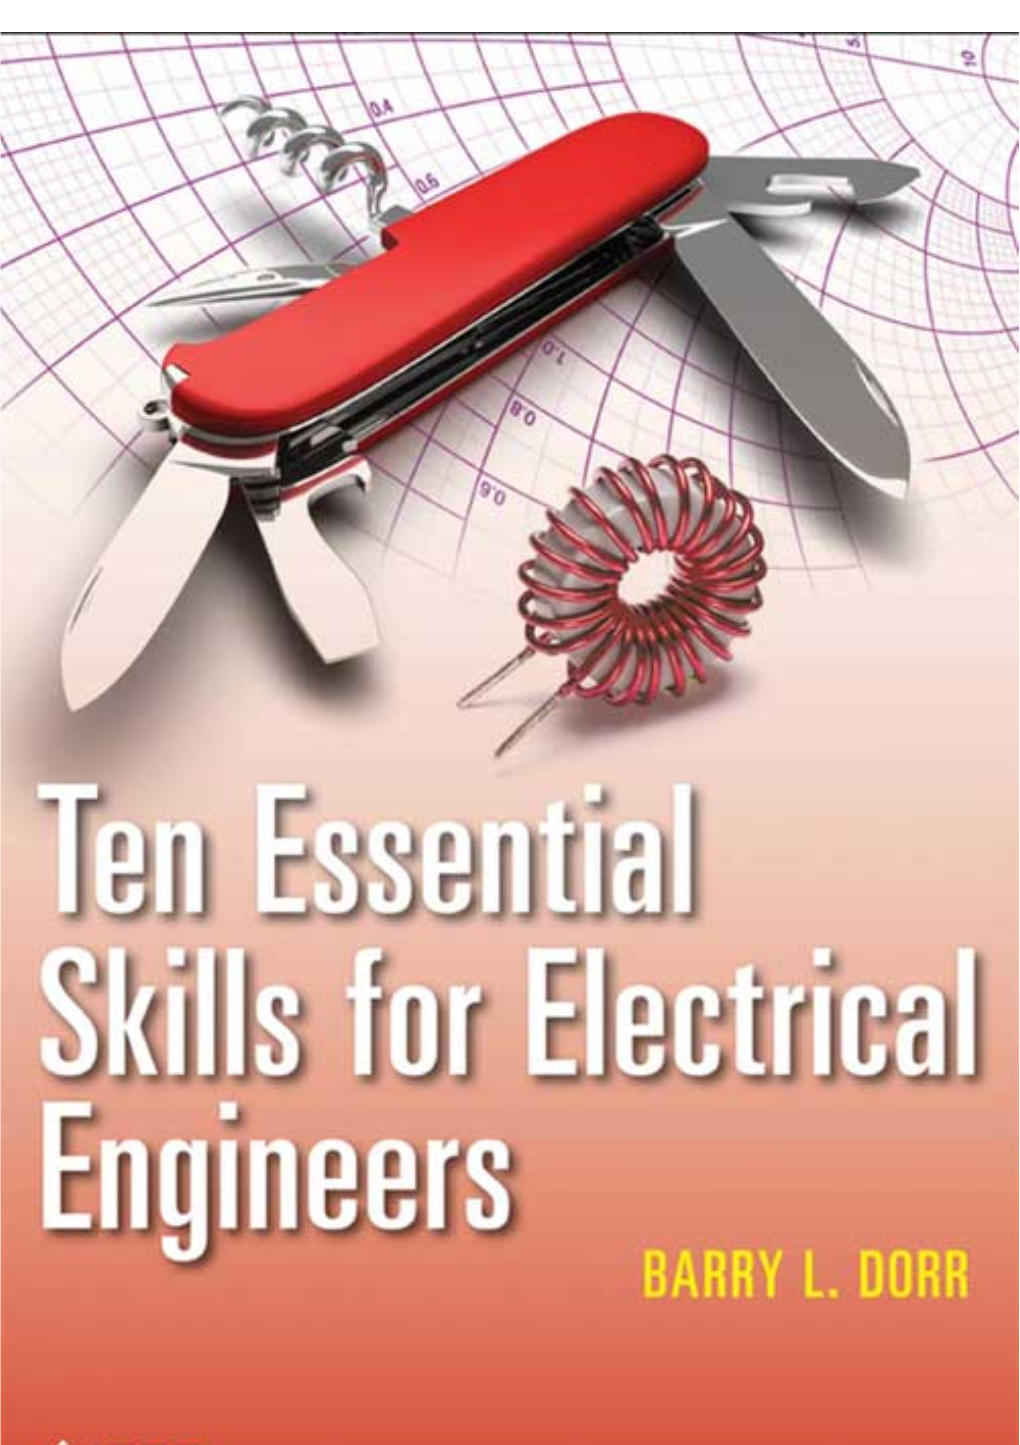 Ten Essential Skills for Electrical Engineers / Barry L